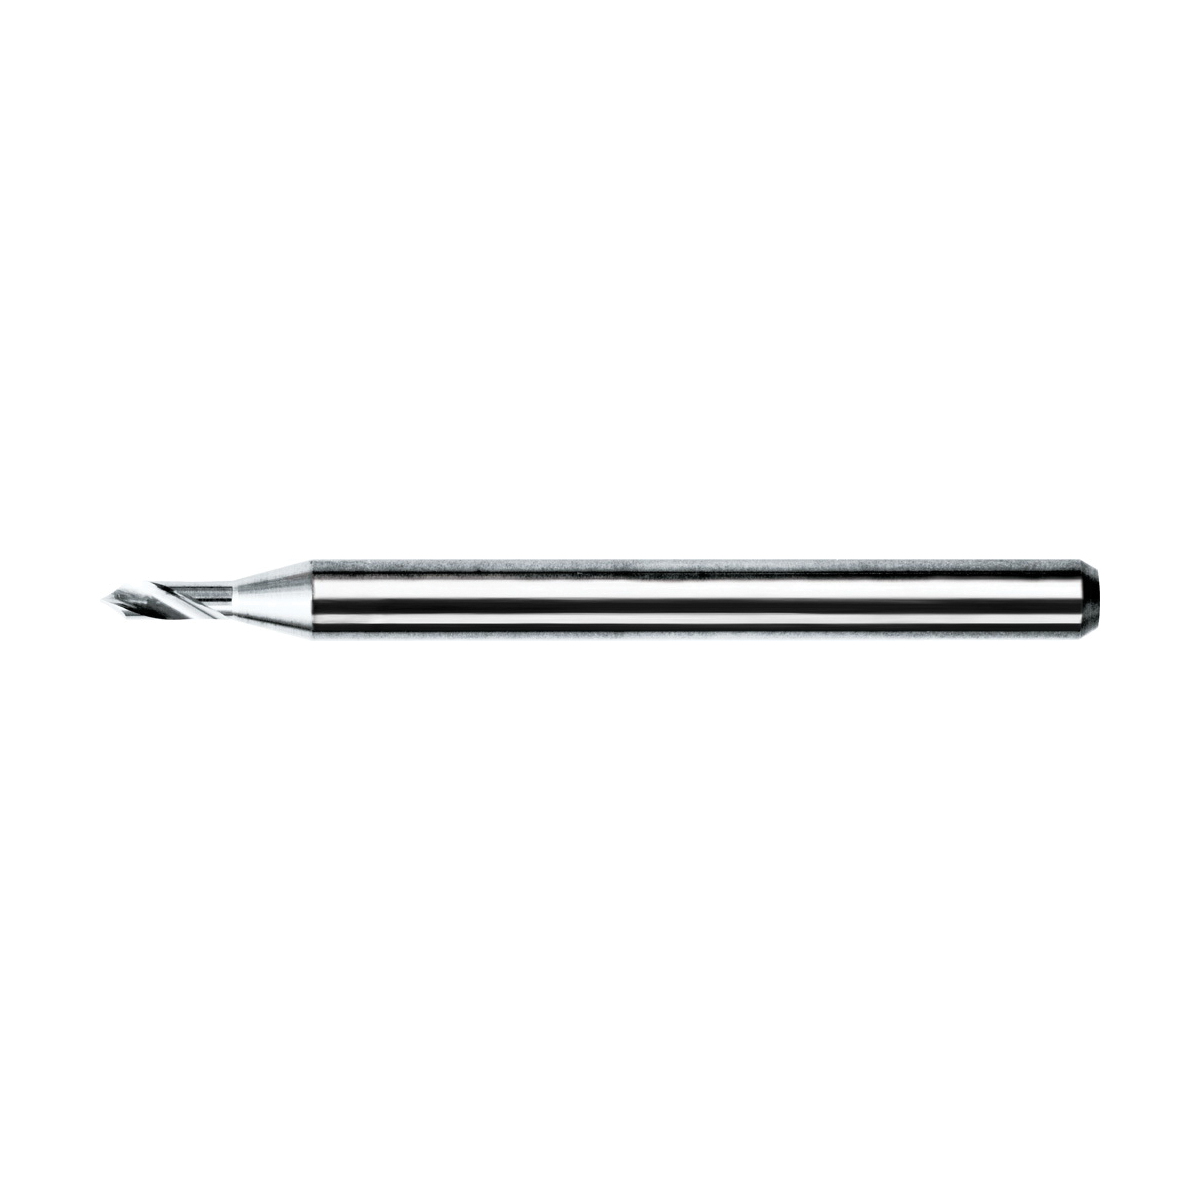 KYOCERA 105-0100.150 Series 105 Micro Drill Bit Carbide 1-1/2 Length 2 Flutes 118° Cutting Angle 0.1500 Cutting Length 1/8 Shank Diameter Uncoated 0.0100 Cutting Diameter